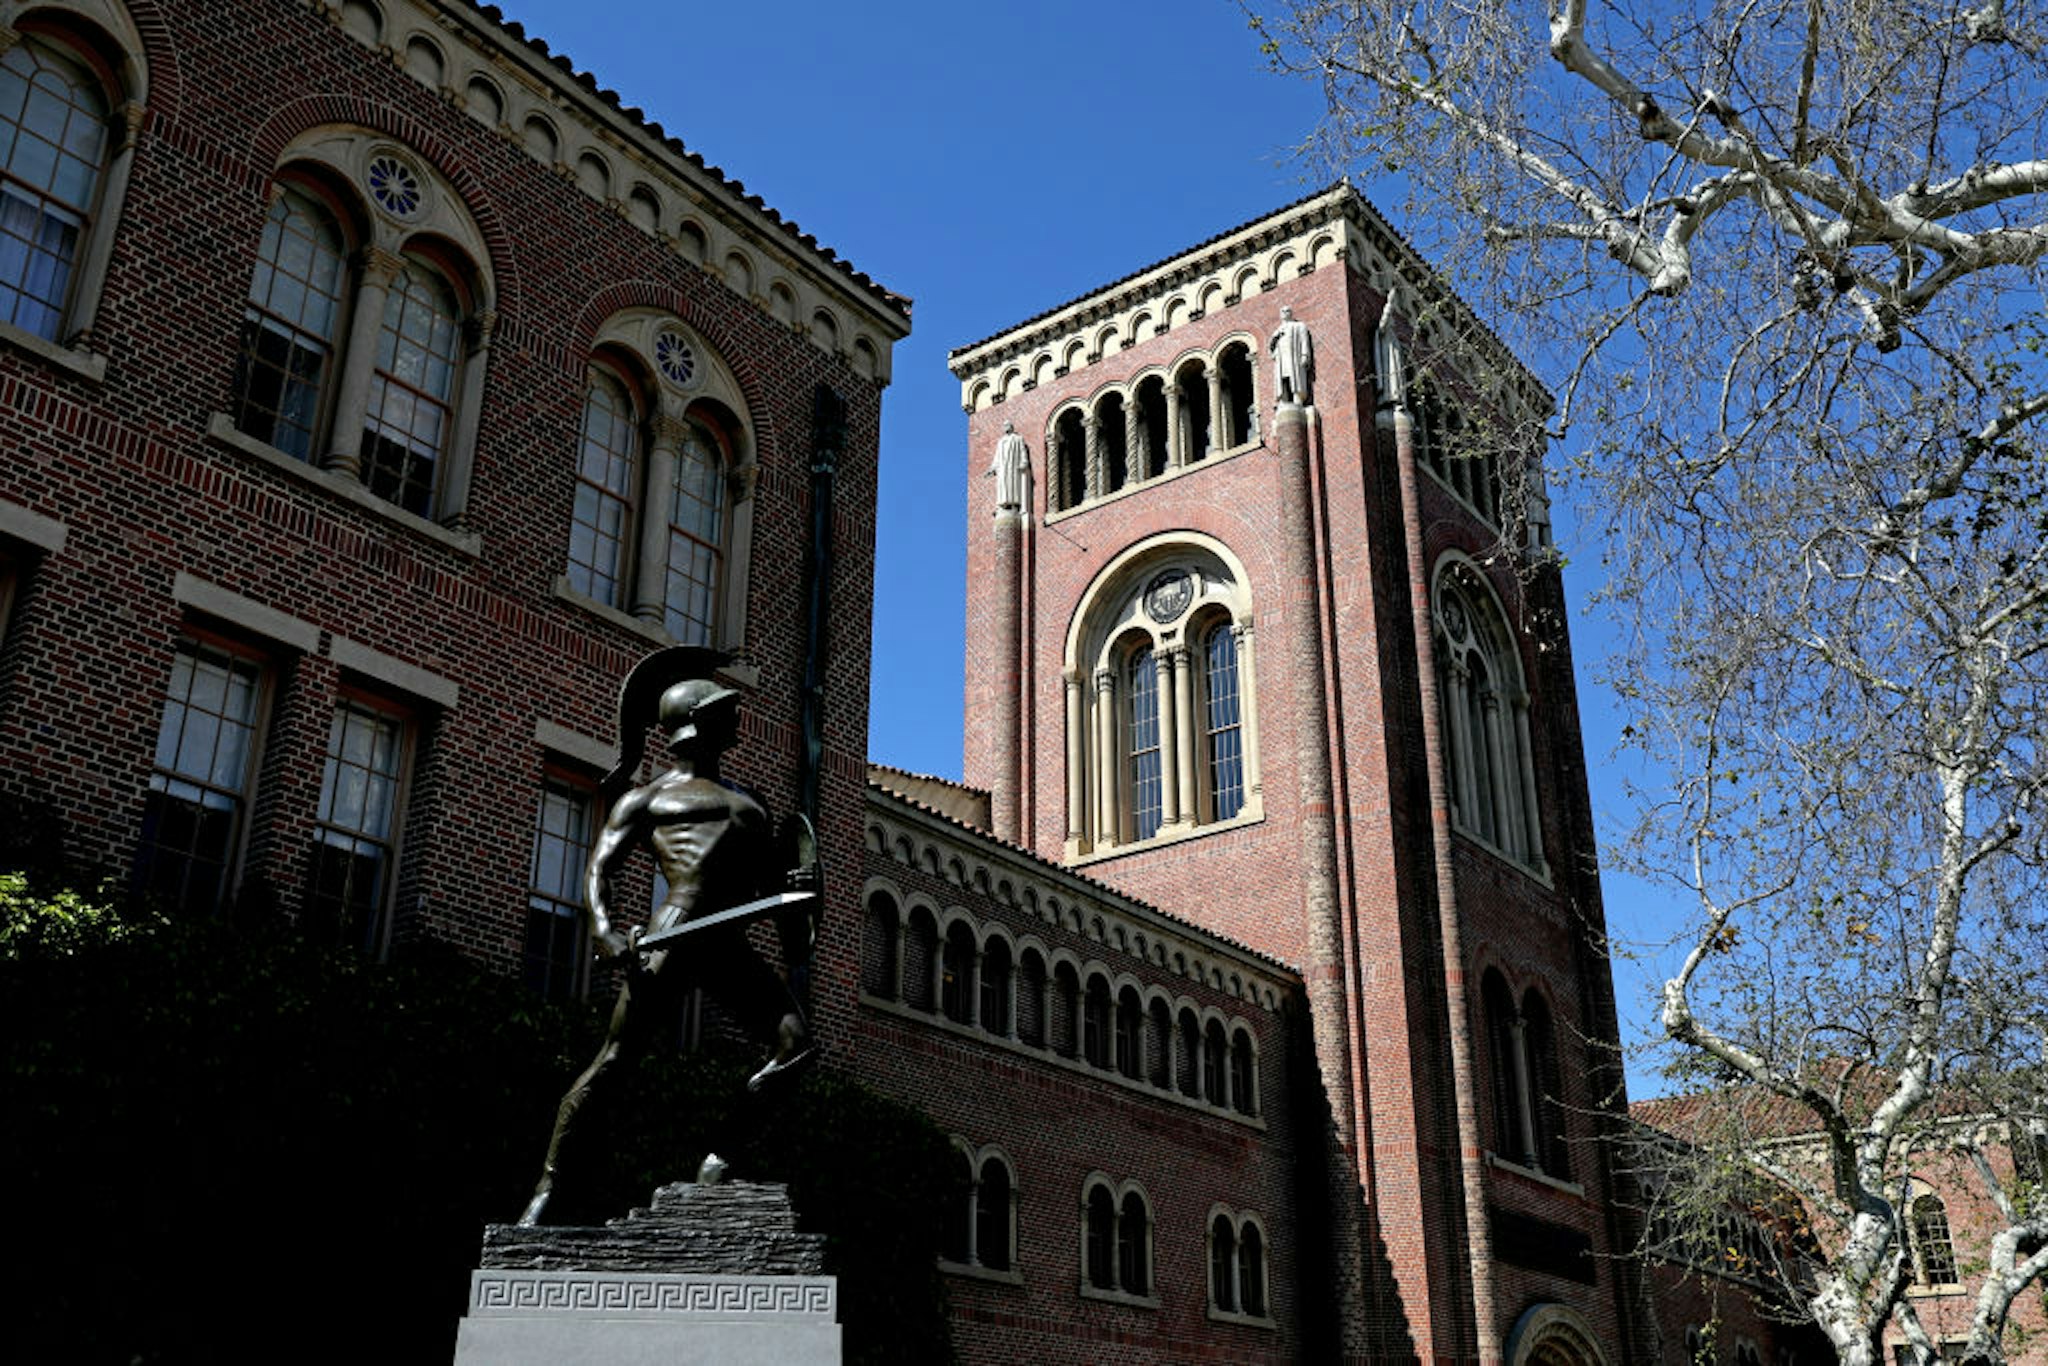 LOS ANGELES, CA - MARCH 28: Bovard Administration Building with Tommy Trojan on the Campus of the University of Southern California on Tuesday, March 28, 2023 in Los Angeles, CA. (Gary Coronado / Los Angeles Times via Getty Images)